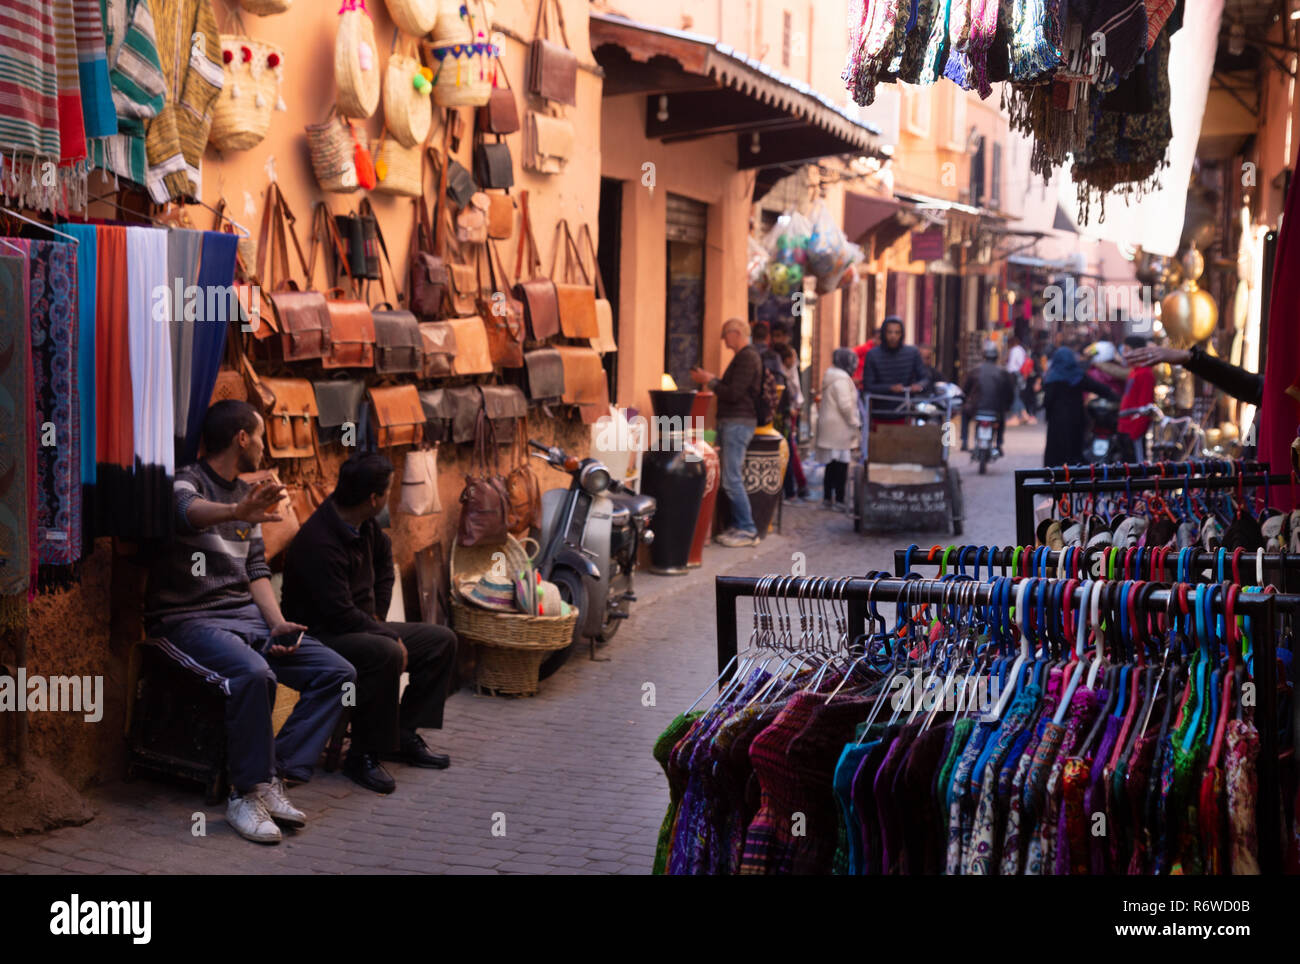 Marrakech souk - people shopping in the souks; the Marrakesh Medina, Marrakech, Morocco, North Africa Stock Photo